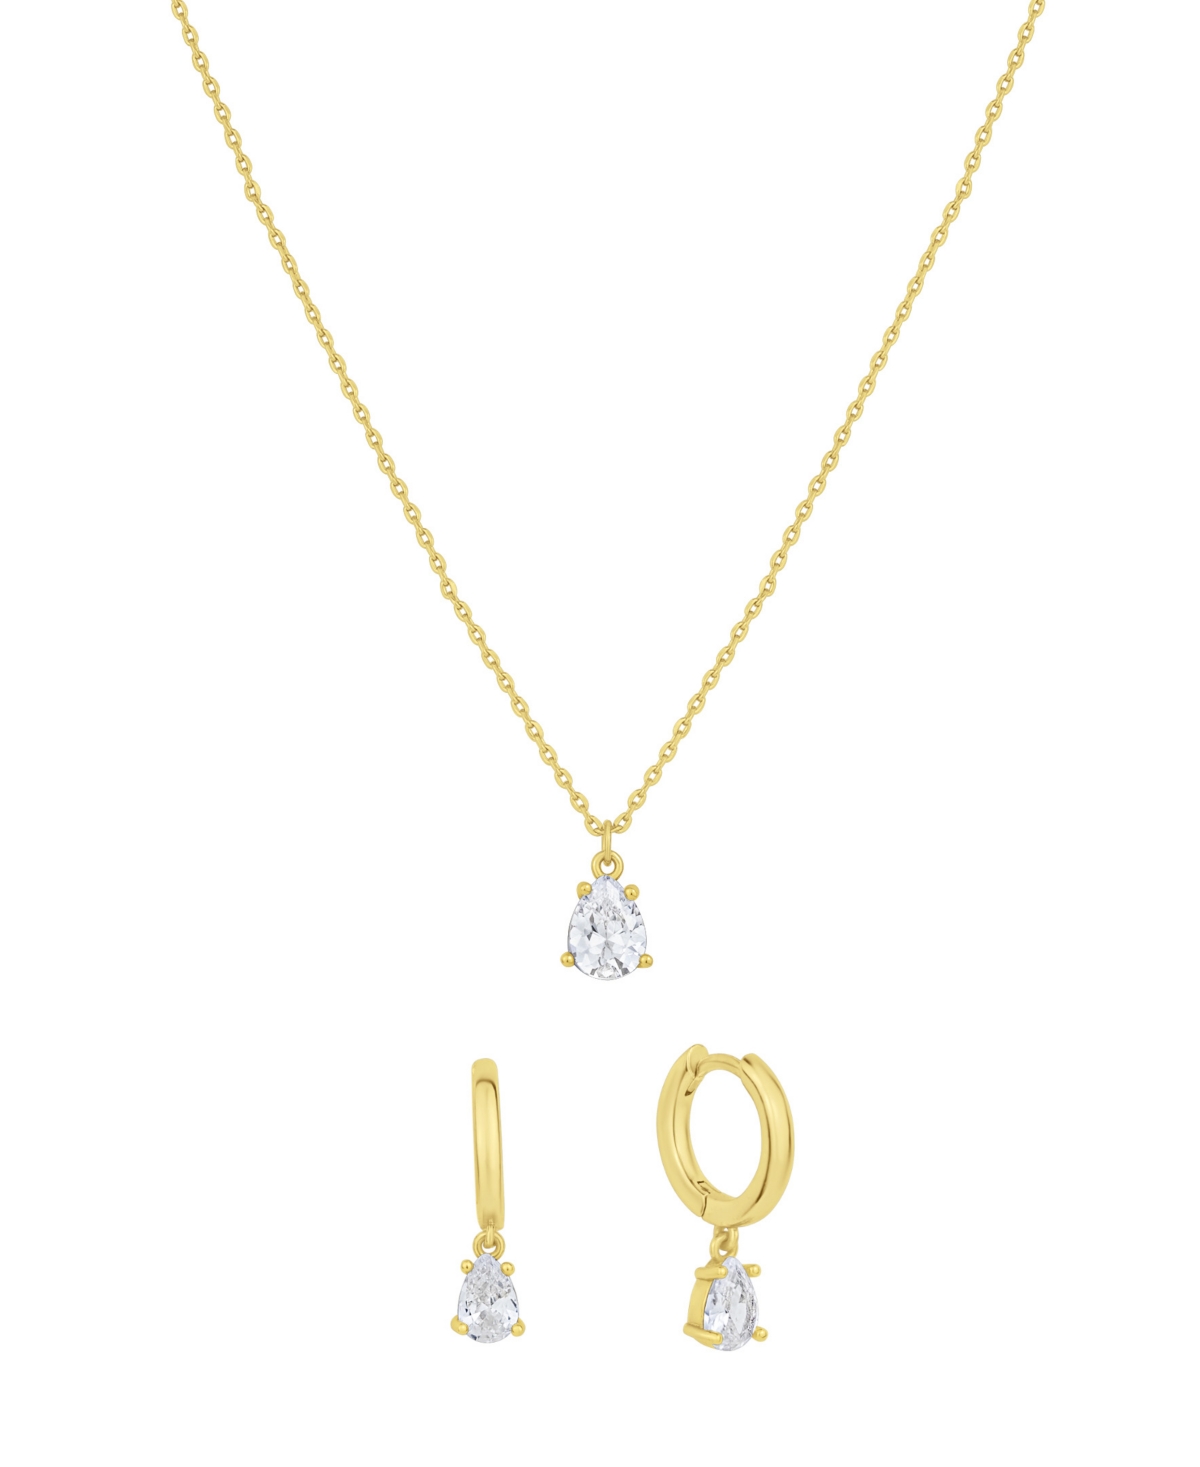 Shop And Now This Cubic Zirconia Teardrop Hoop Earring And Necklace With Jewelry Box Set In Gold